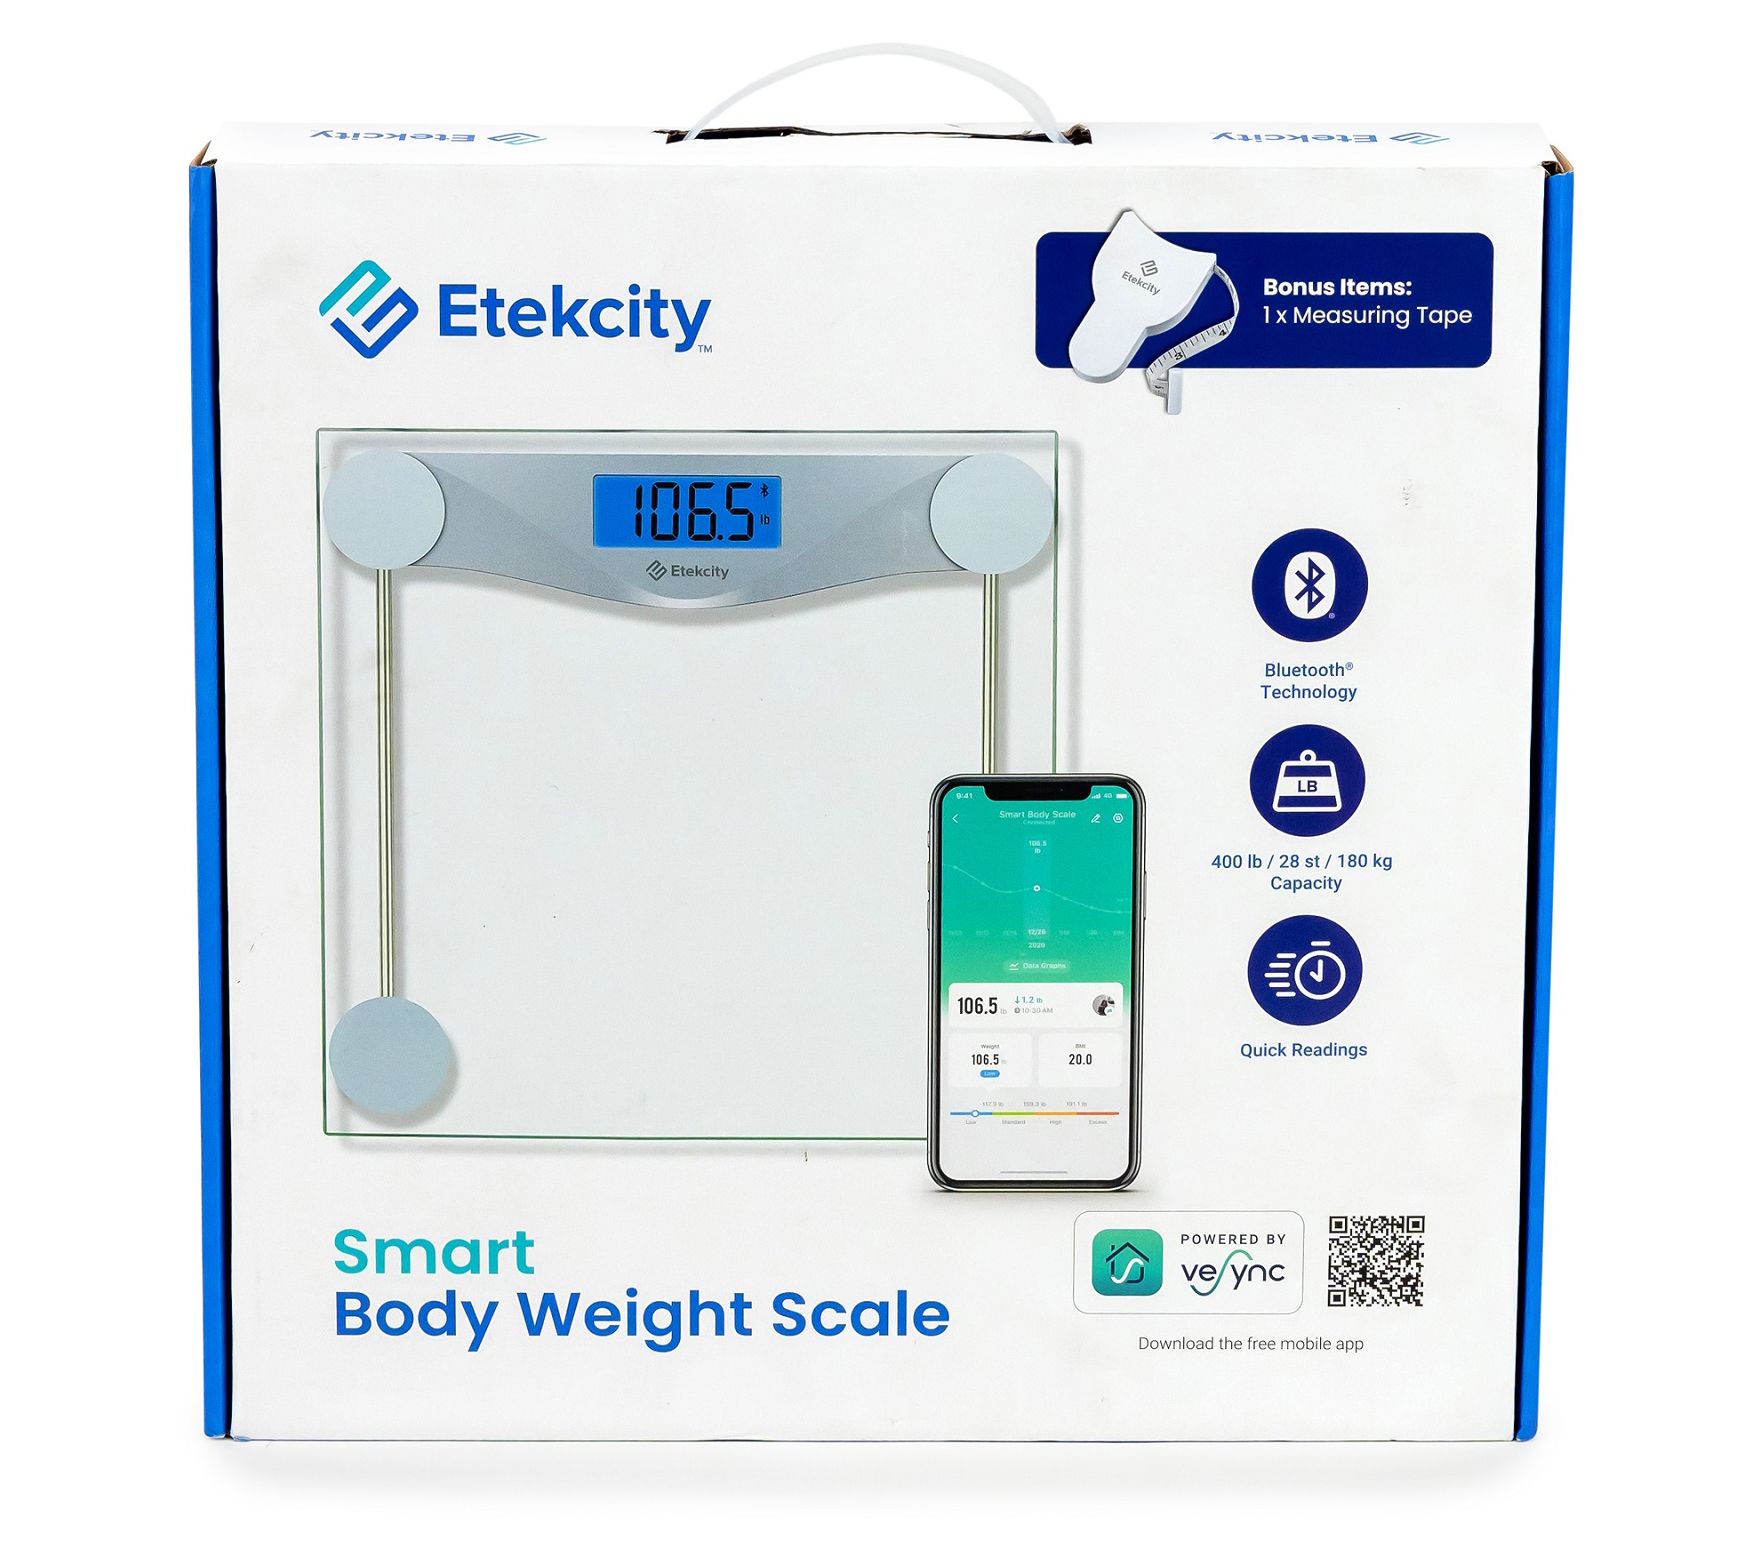 Etekcity Luggage Scale, Travel Essentials, Digital Weight Scales for Travel